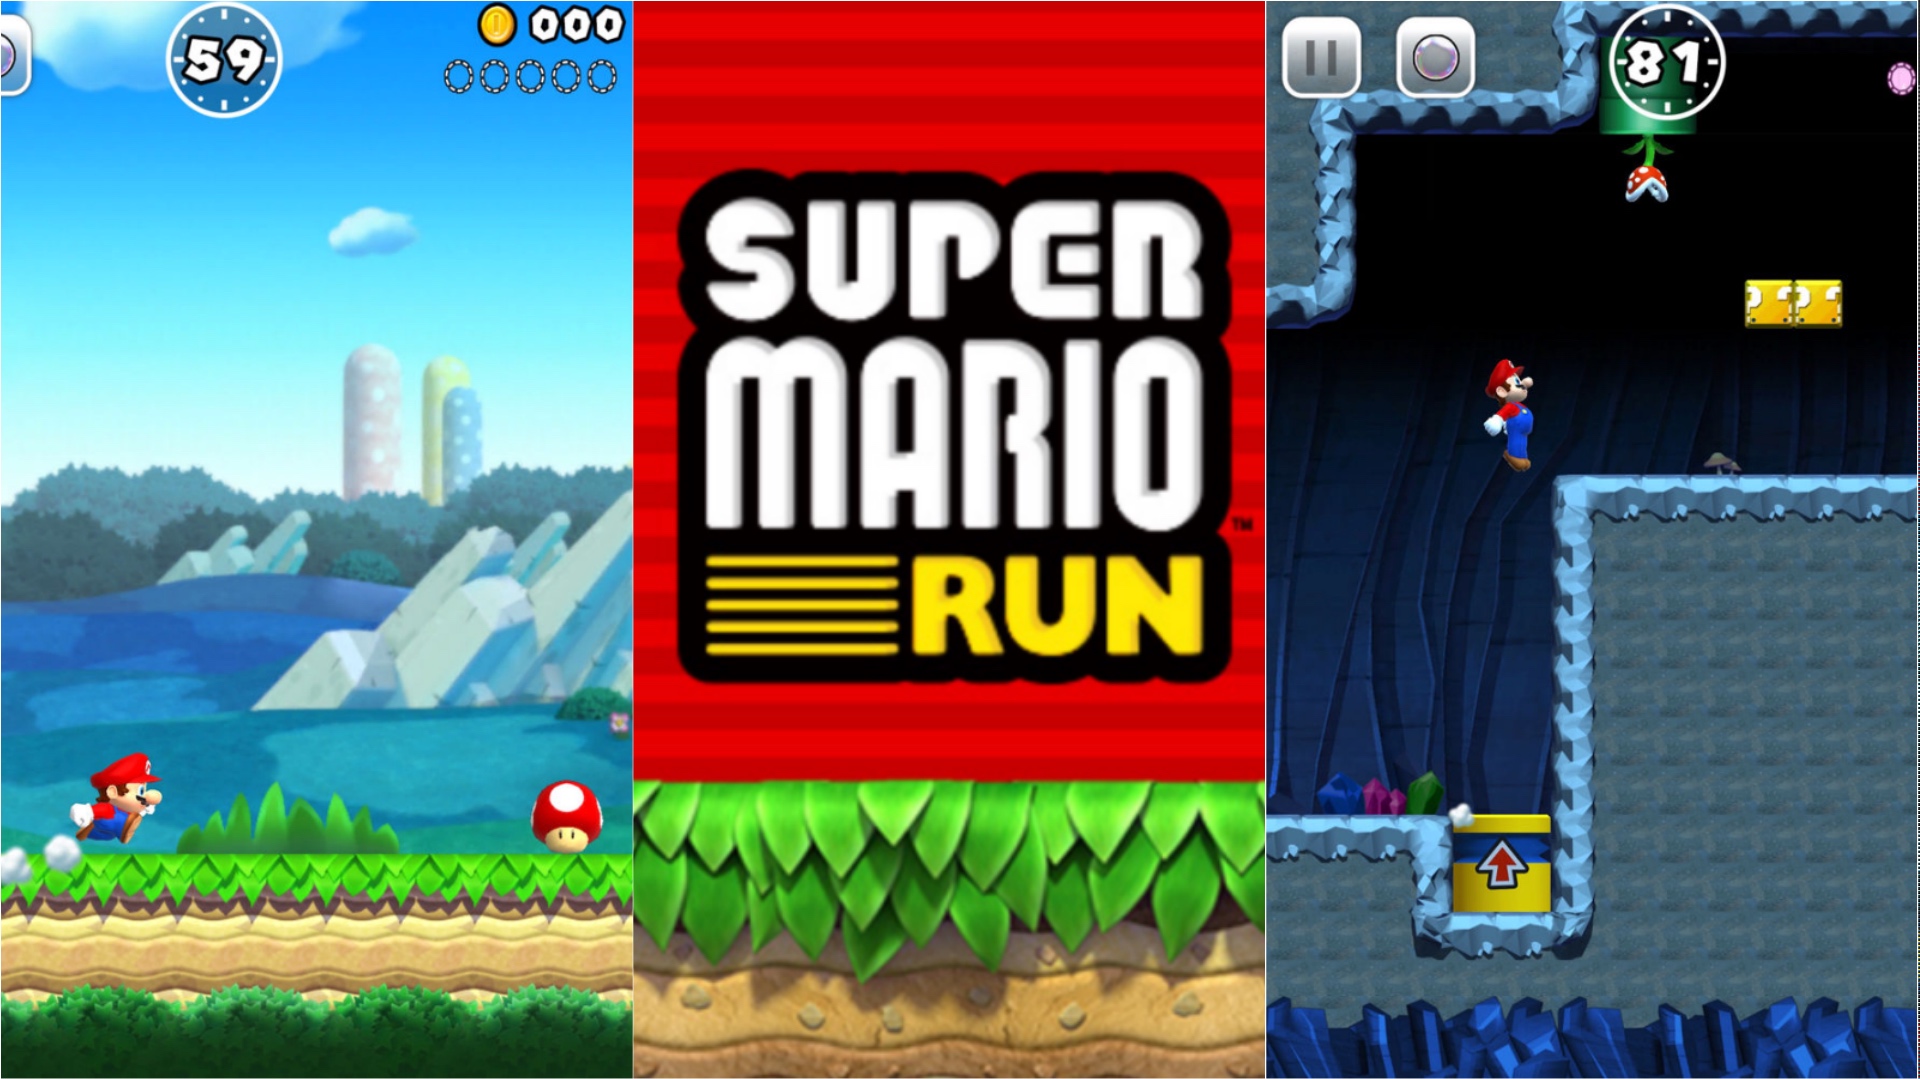 Nintendo's 'Super Mario Run' disappoints mobile gamers